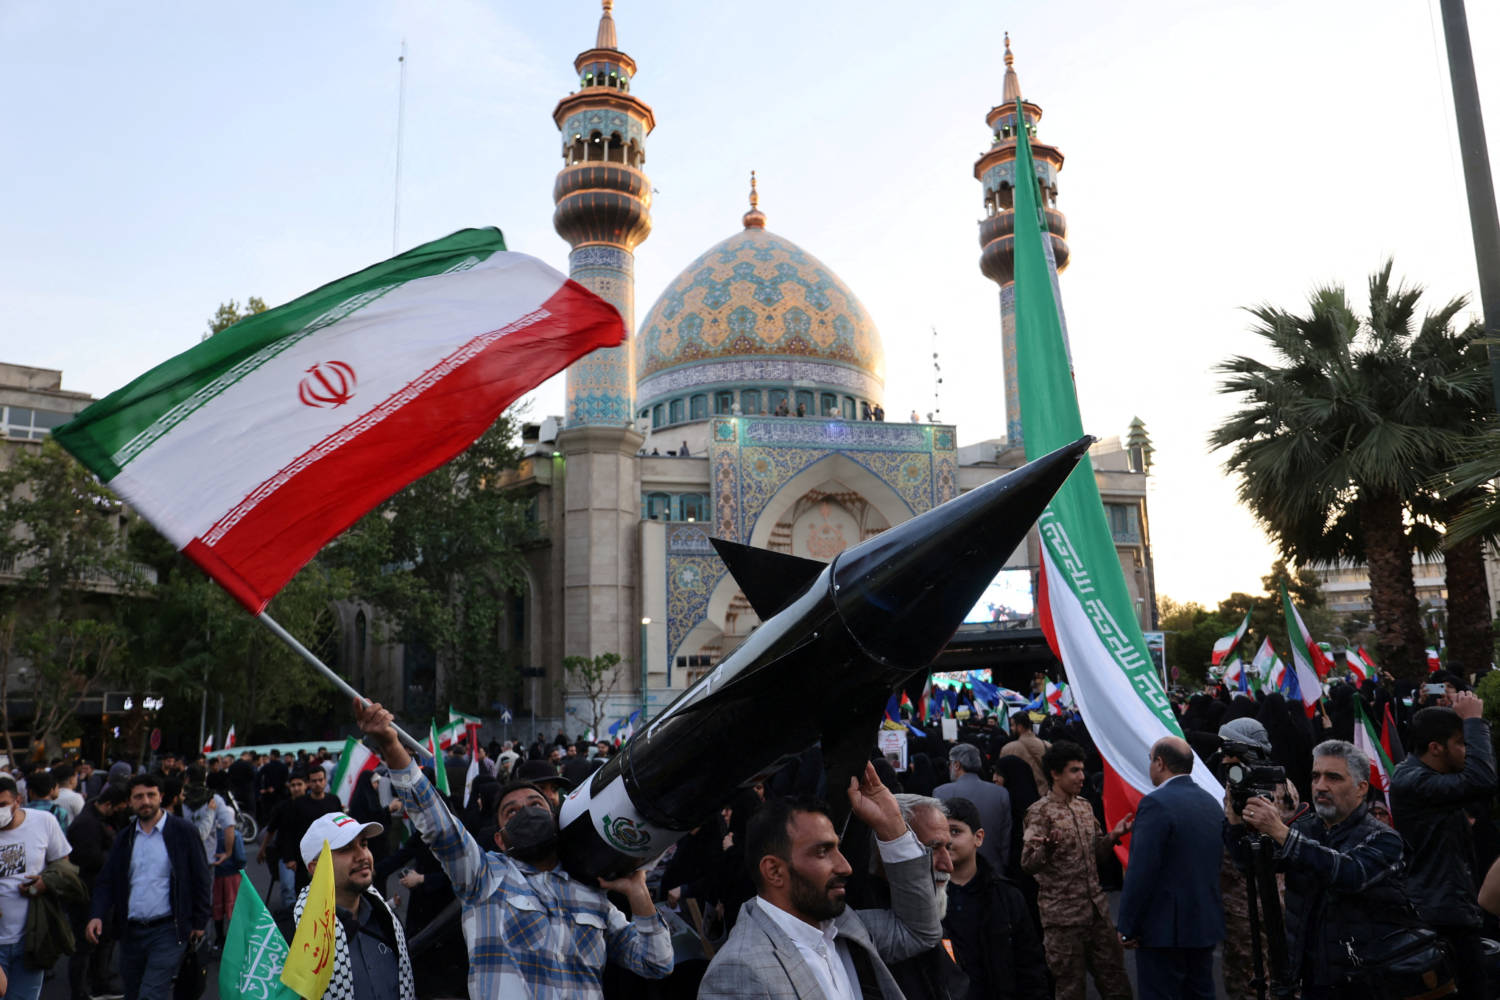 File Photo: Iranians Carry A Model Of A Missile During A Celebration Following The Irgc Attack On Israel, In Tehran